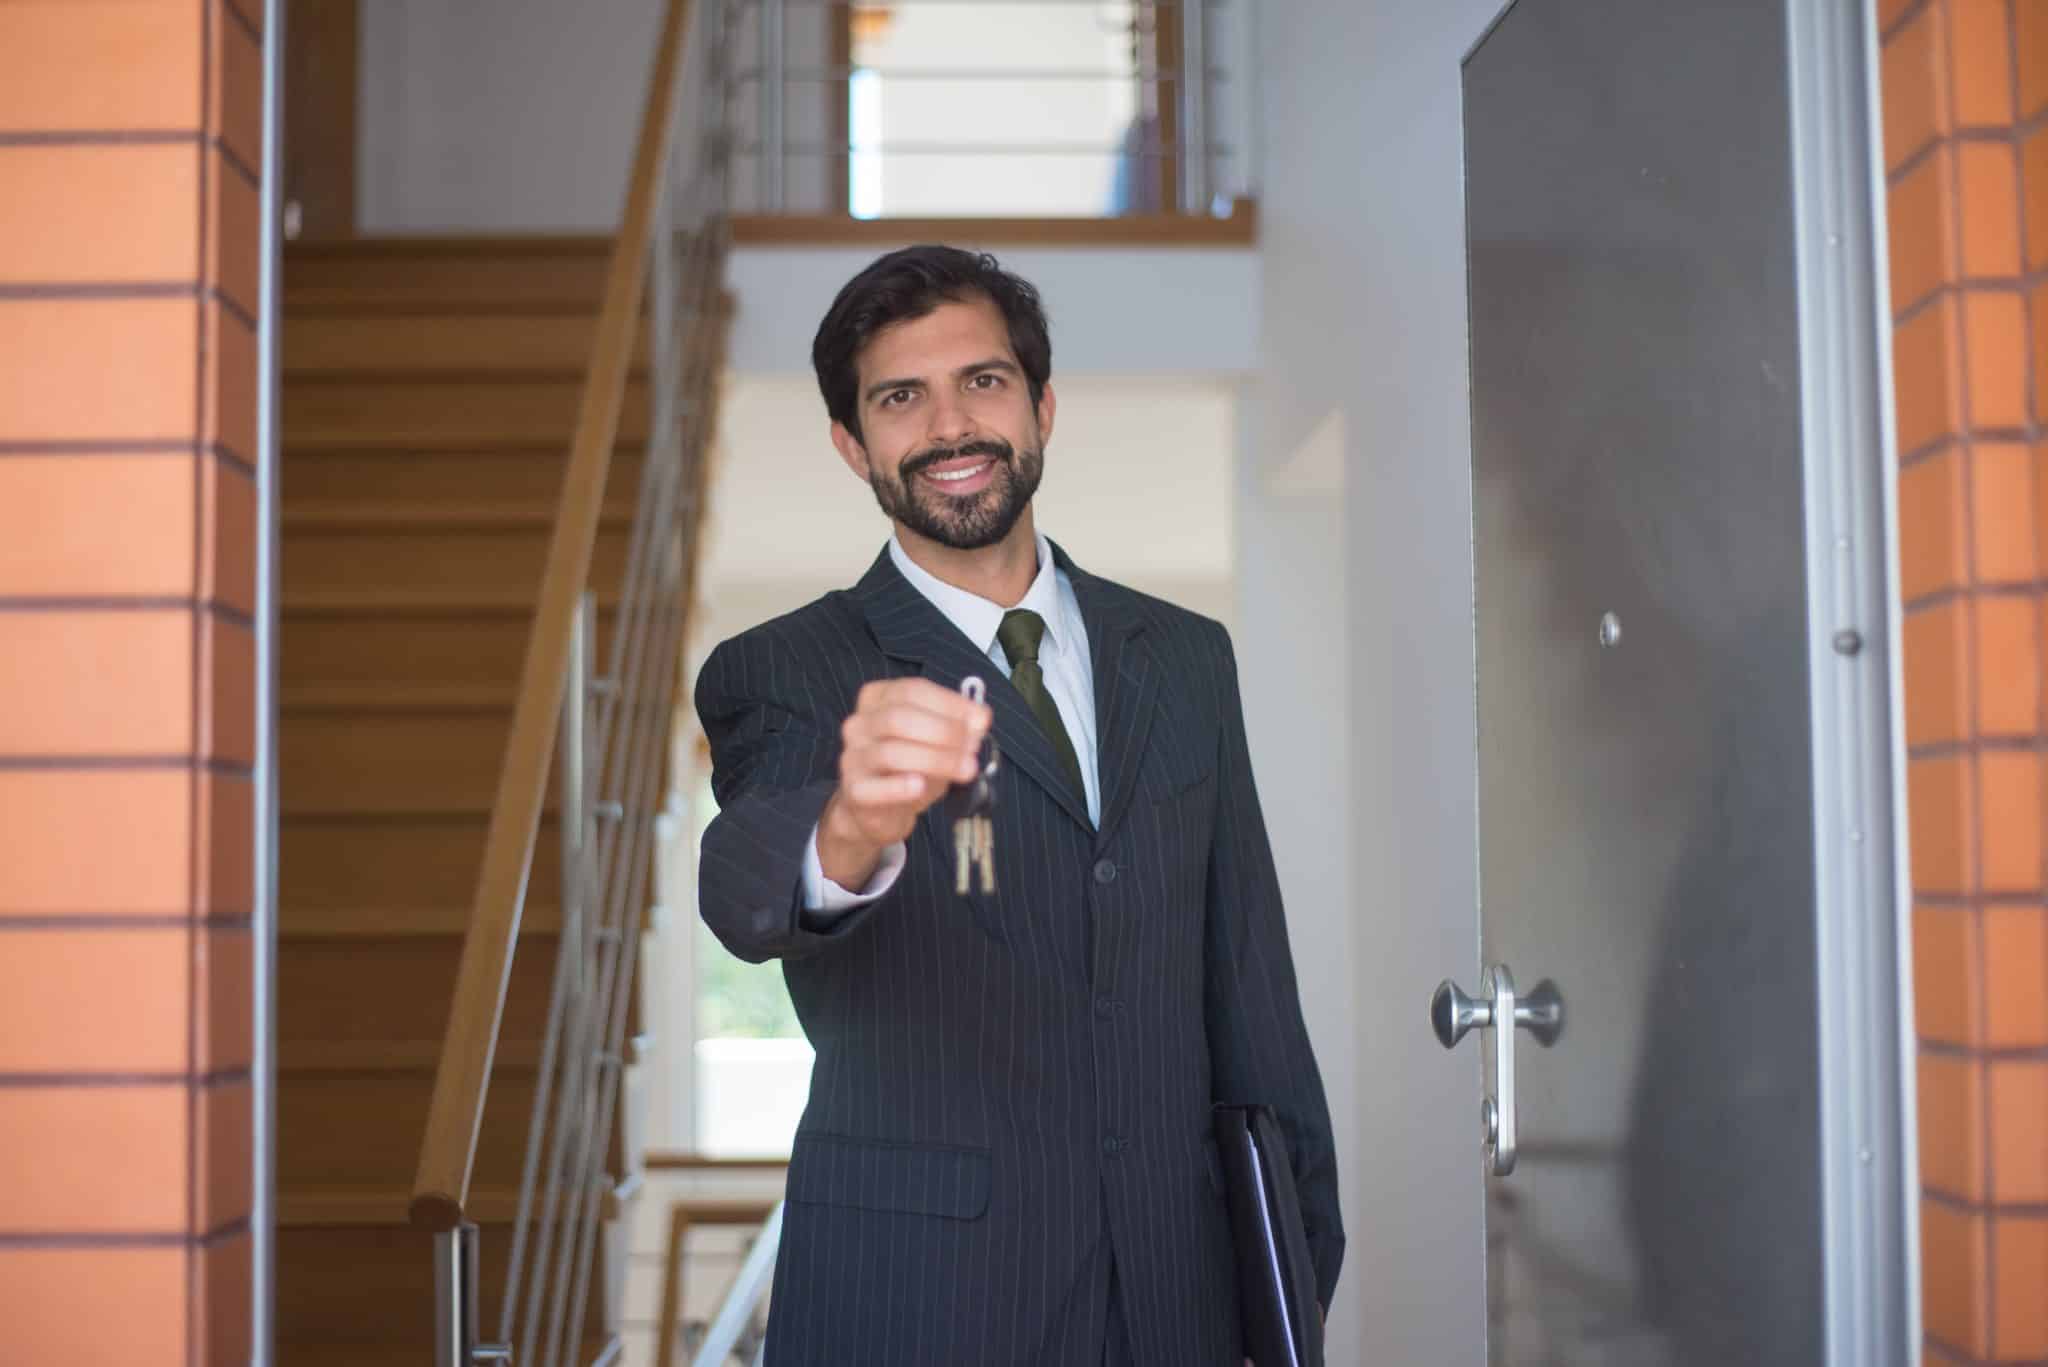 real estate agent standing in doorway of home and holding out set of keys